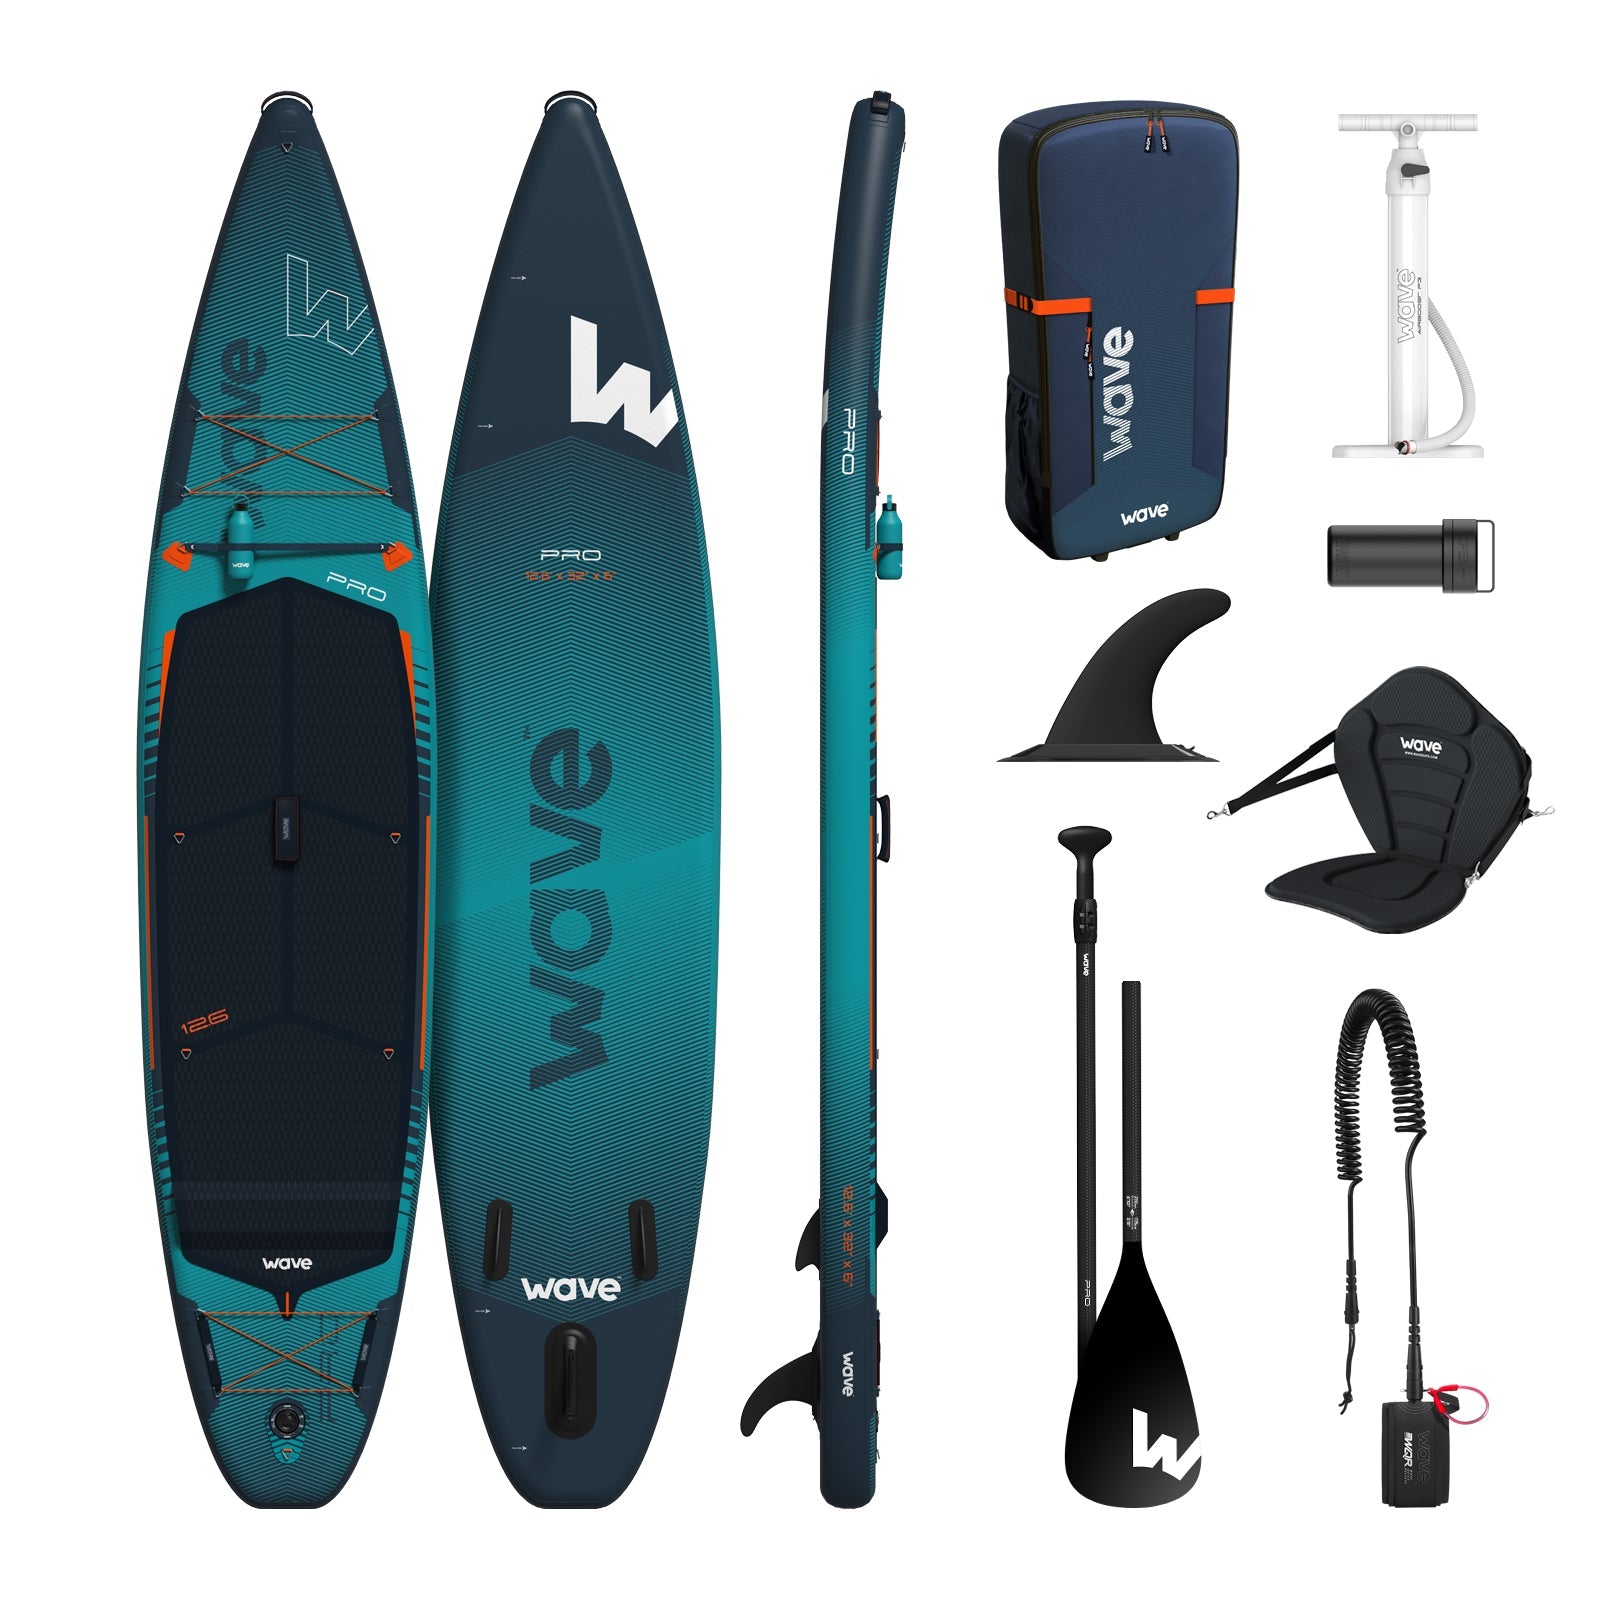 Pro 2.0 SUP | Inflatable Paddleboard | 12'6ft | Navy - Wave Sups UK